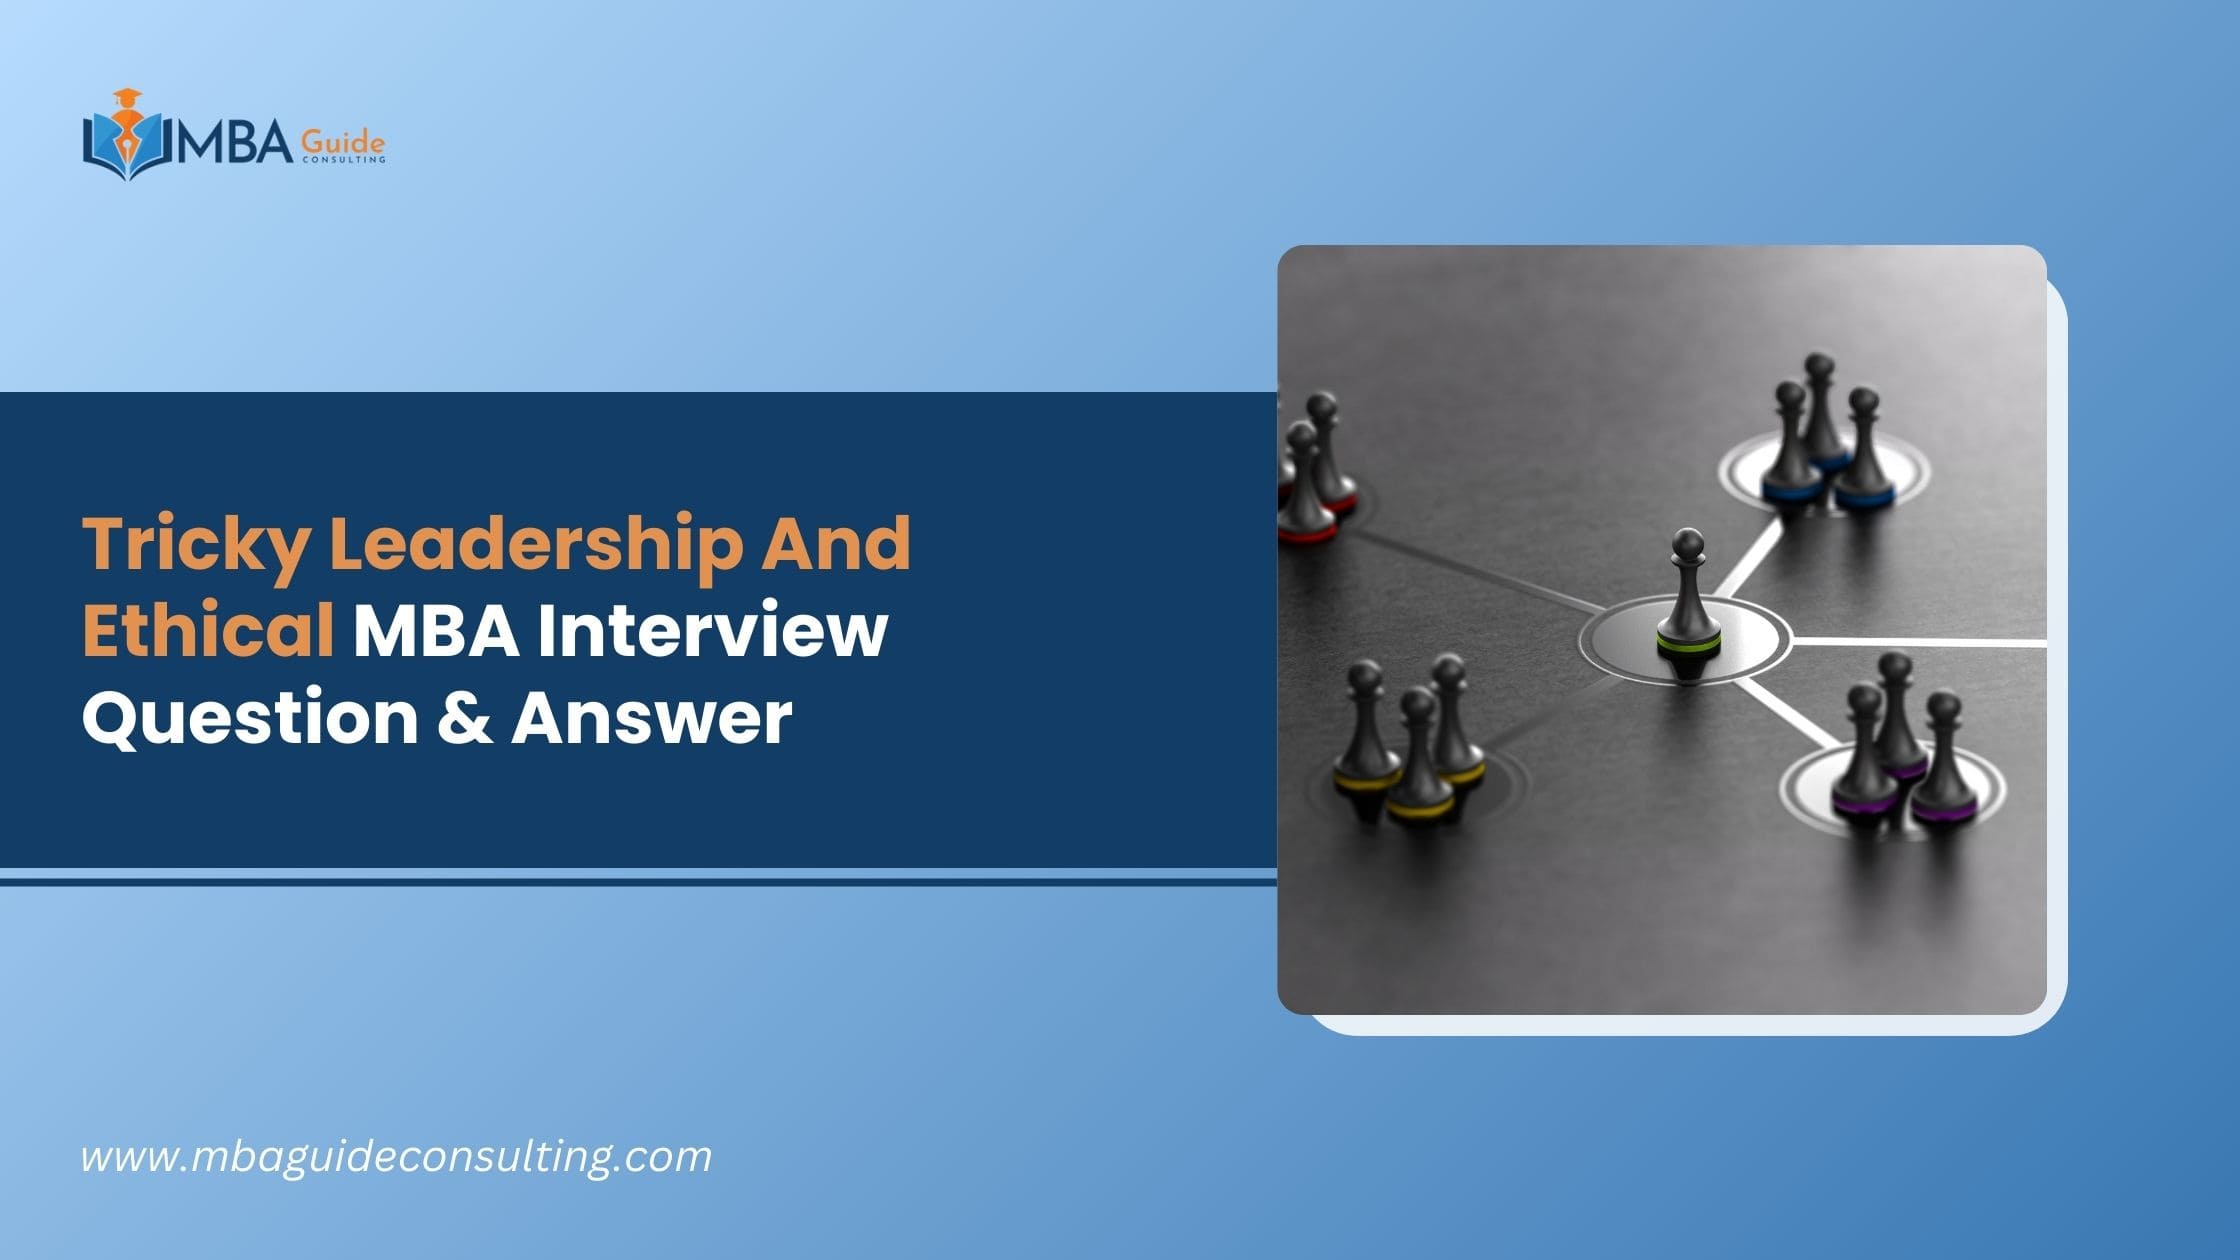 Tricky Leadership And Ethical MBA Interview Question & Answer